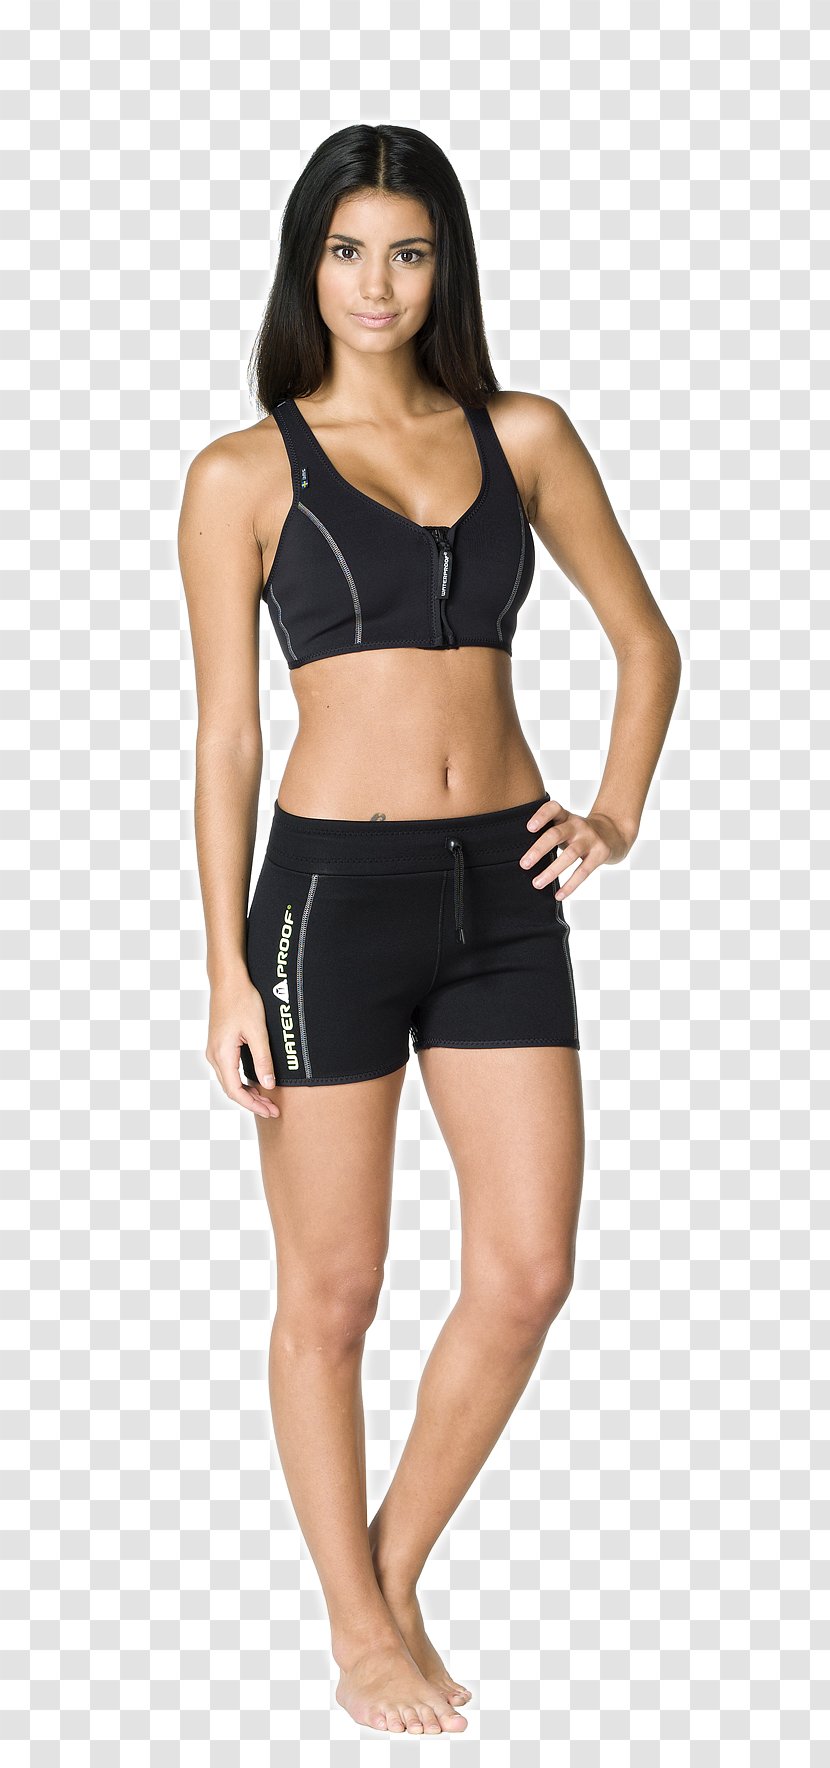 Neoprene Wetsuit Shorts Clothing Top - Watercolor - Suit Transparent PNG